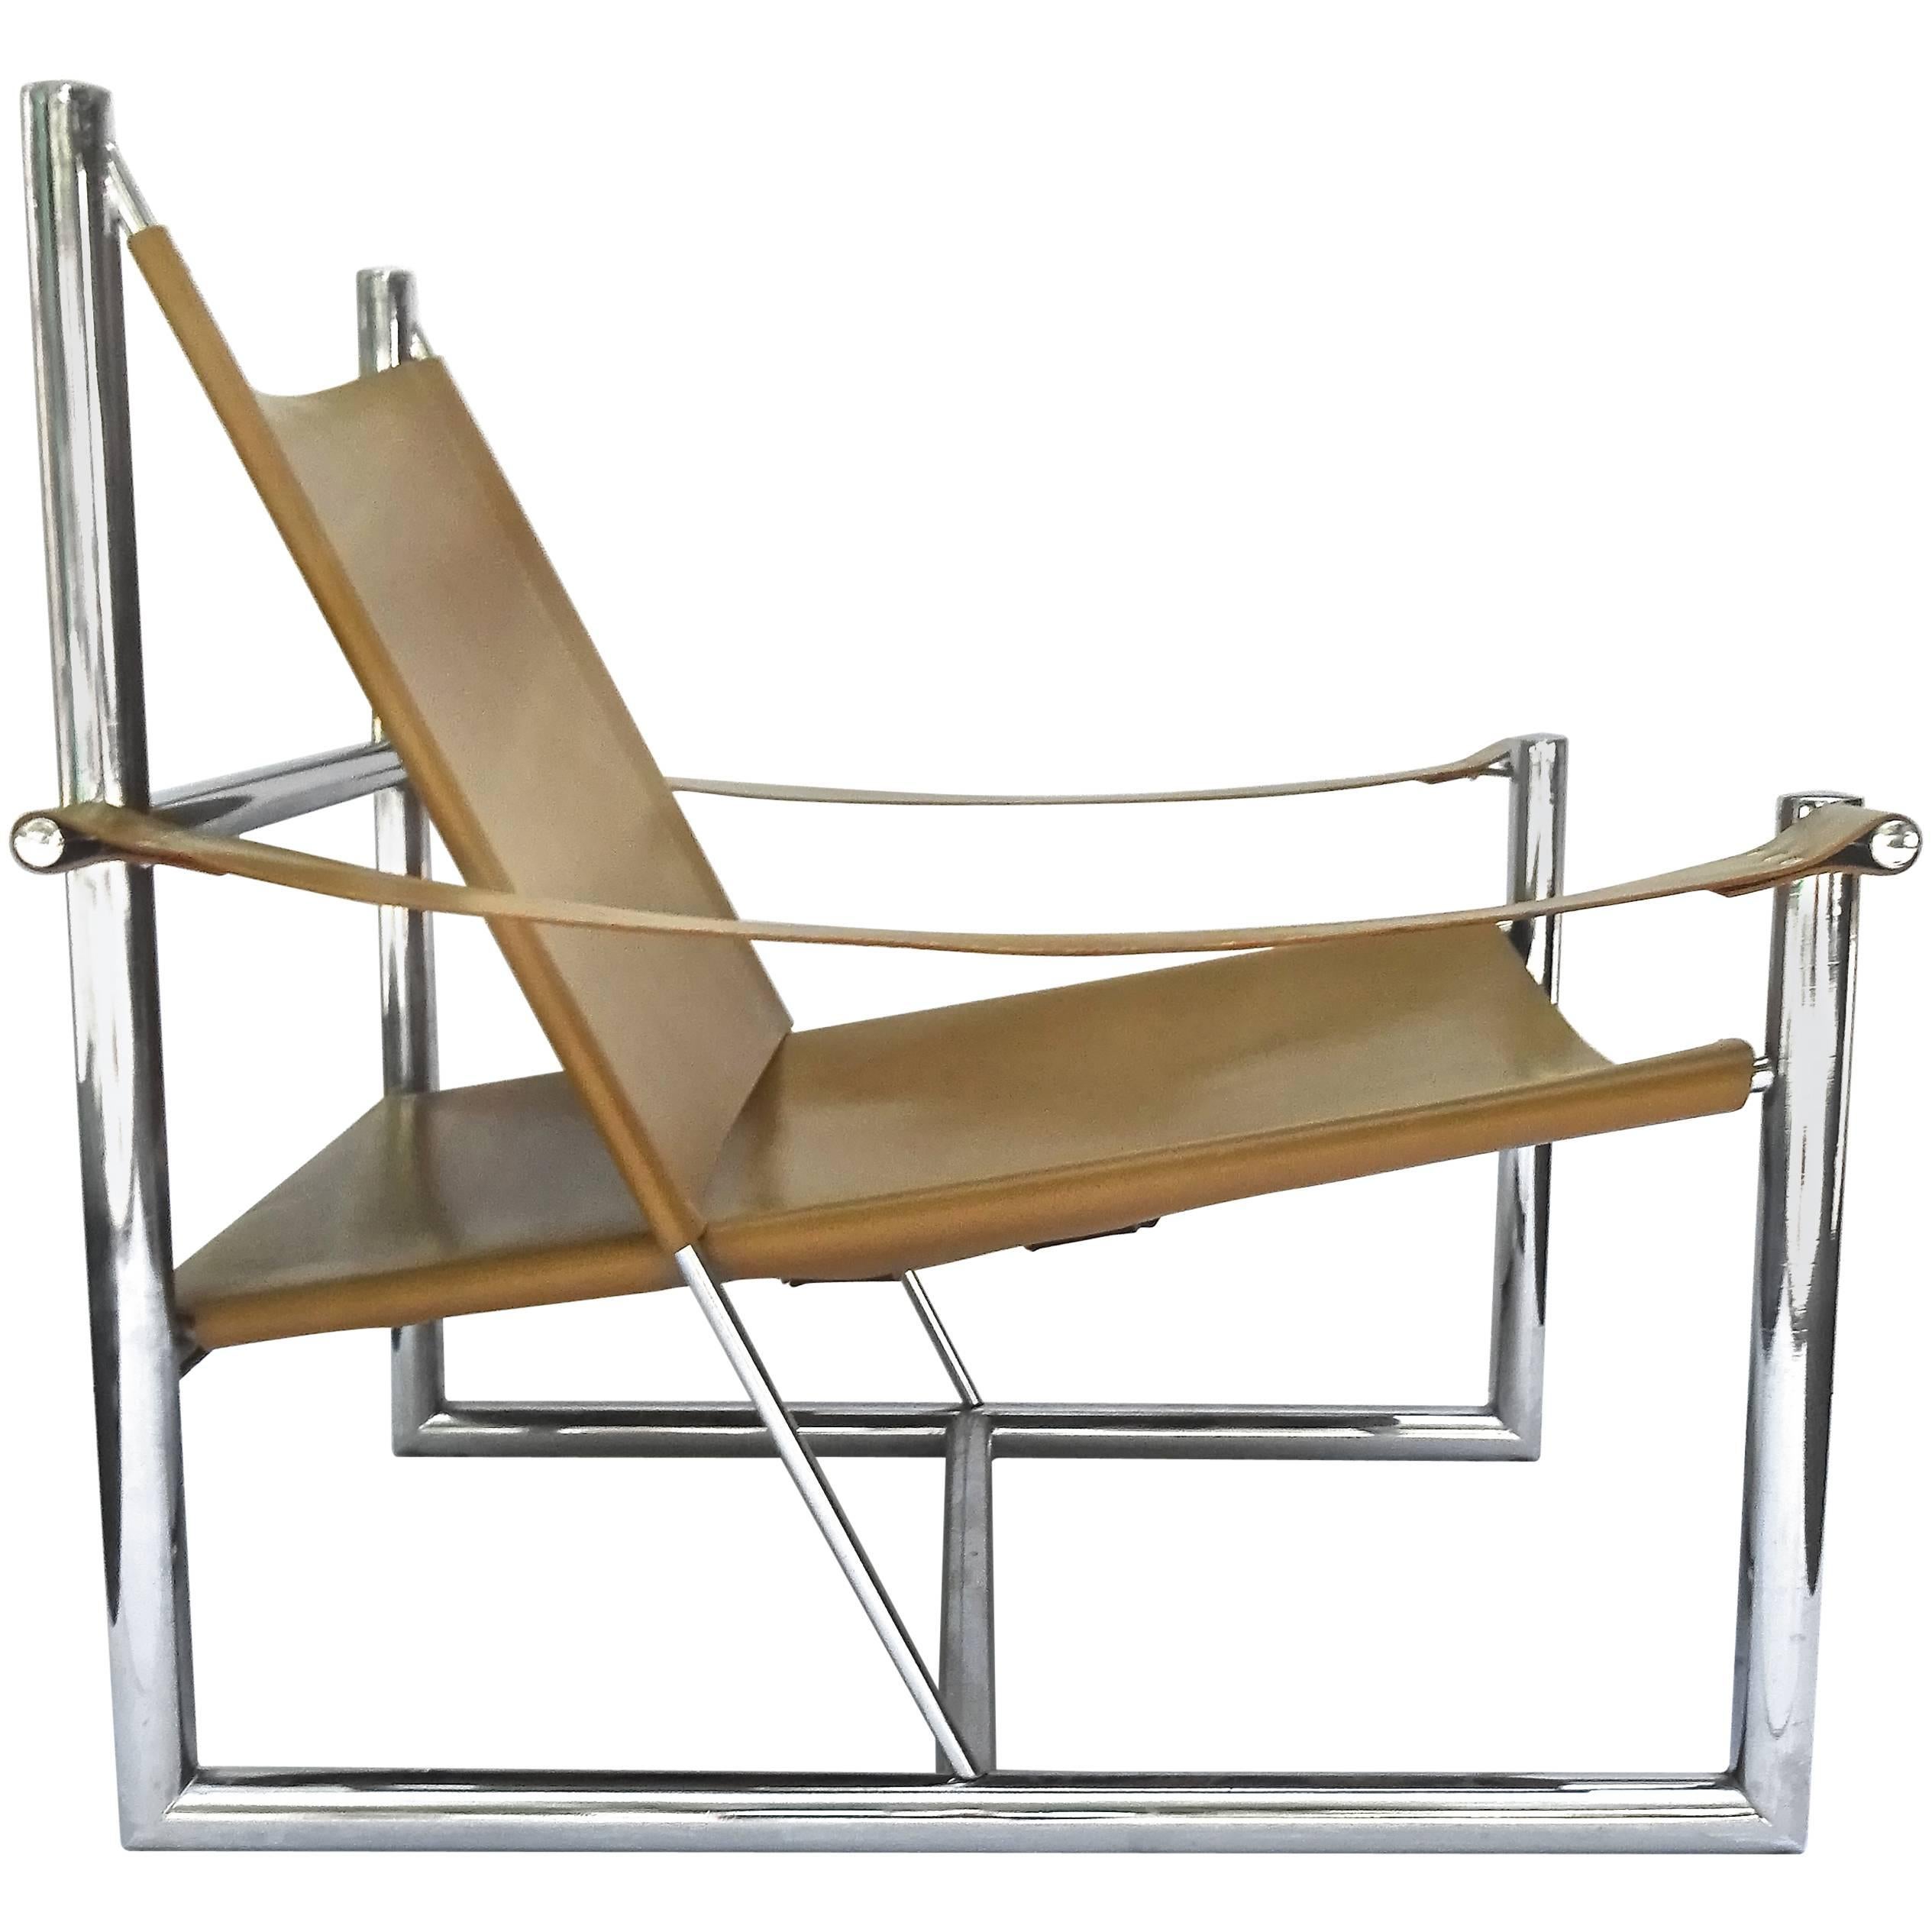 Architectural 1970s Milo Baughman Leather and Chrome Lounge Chair